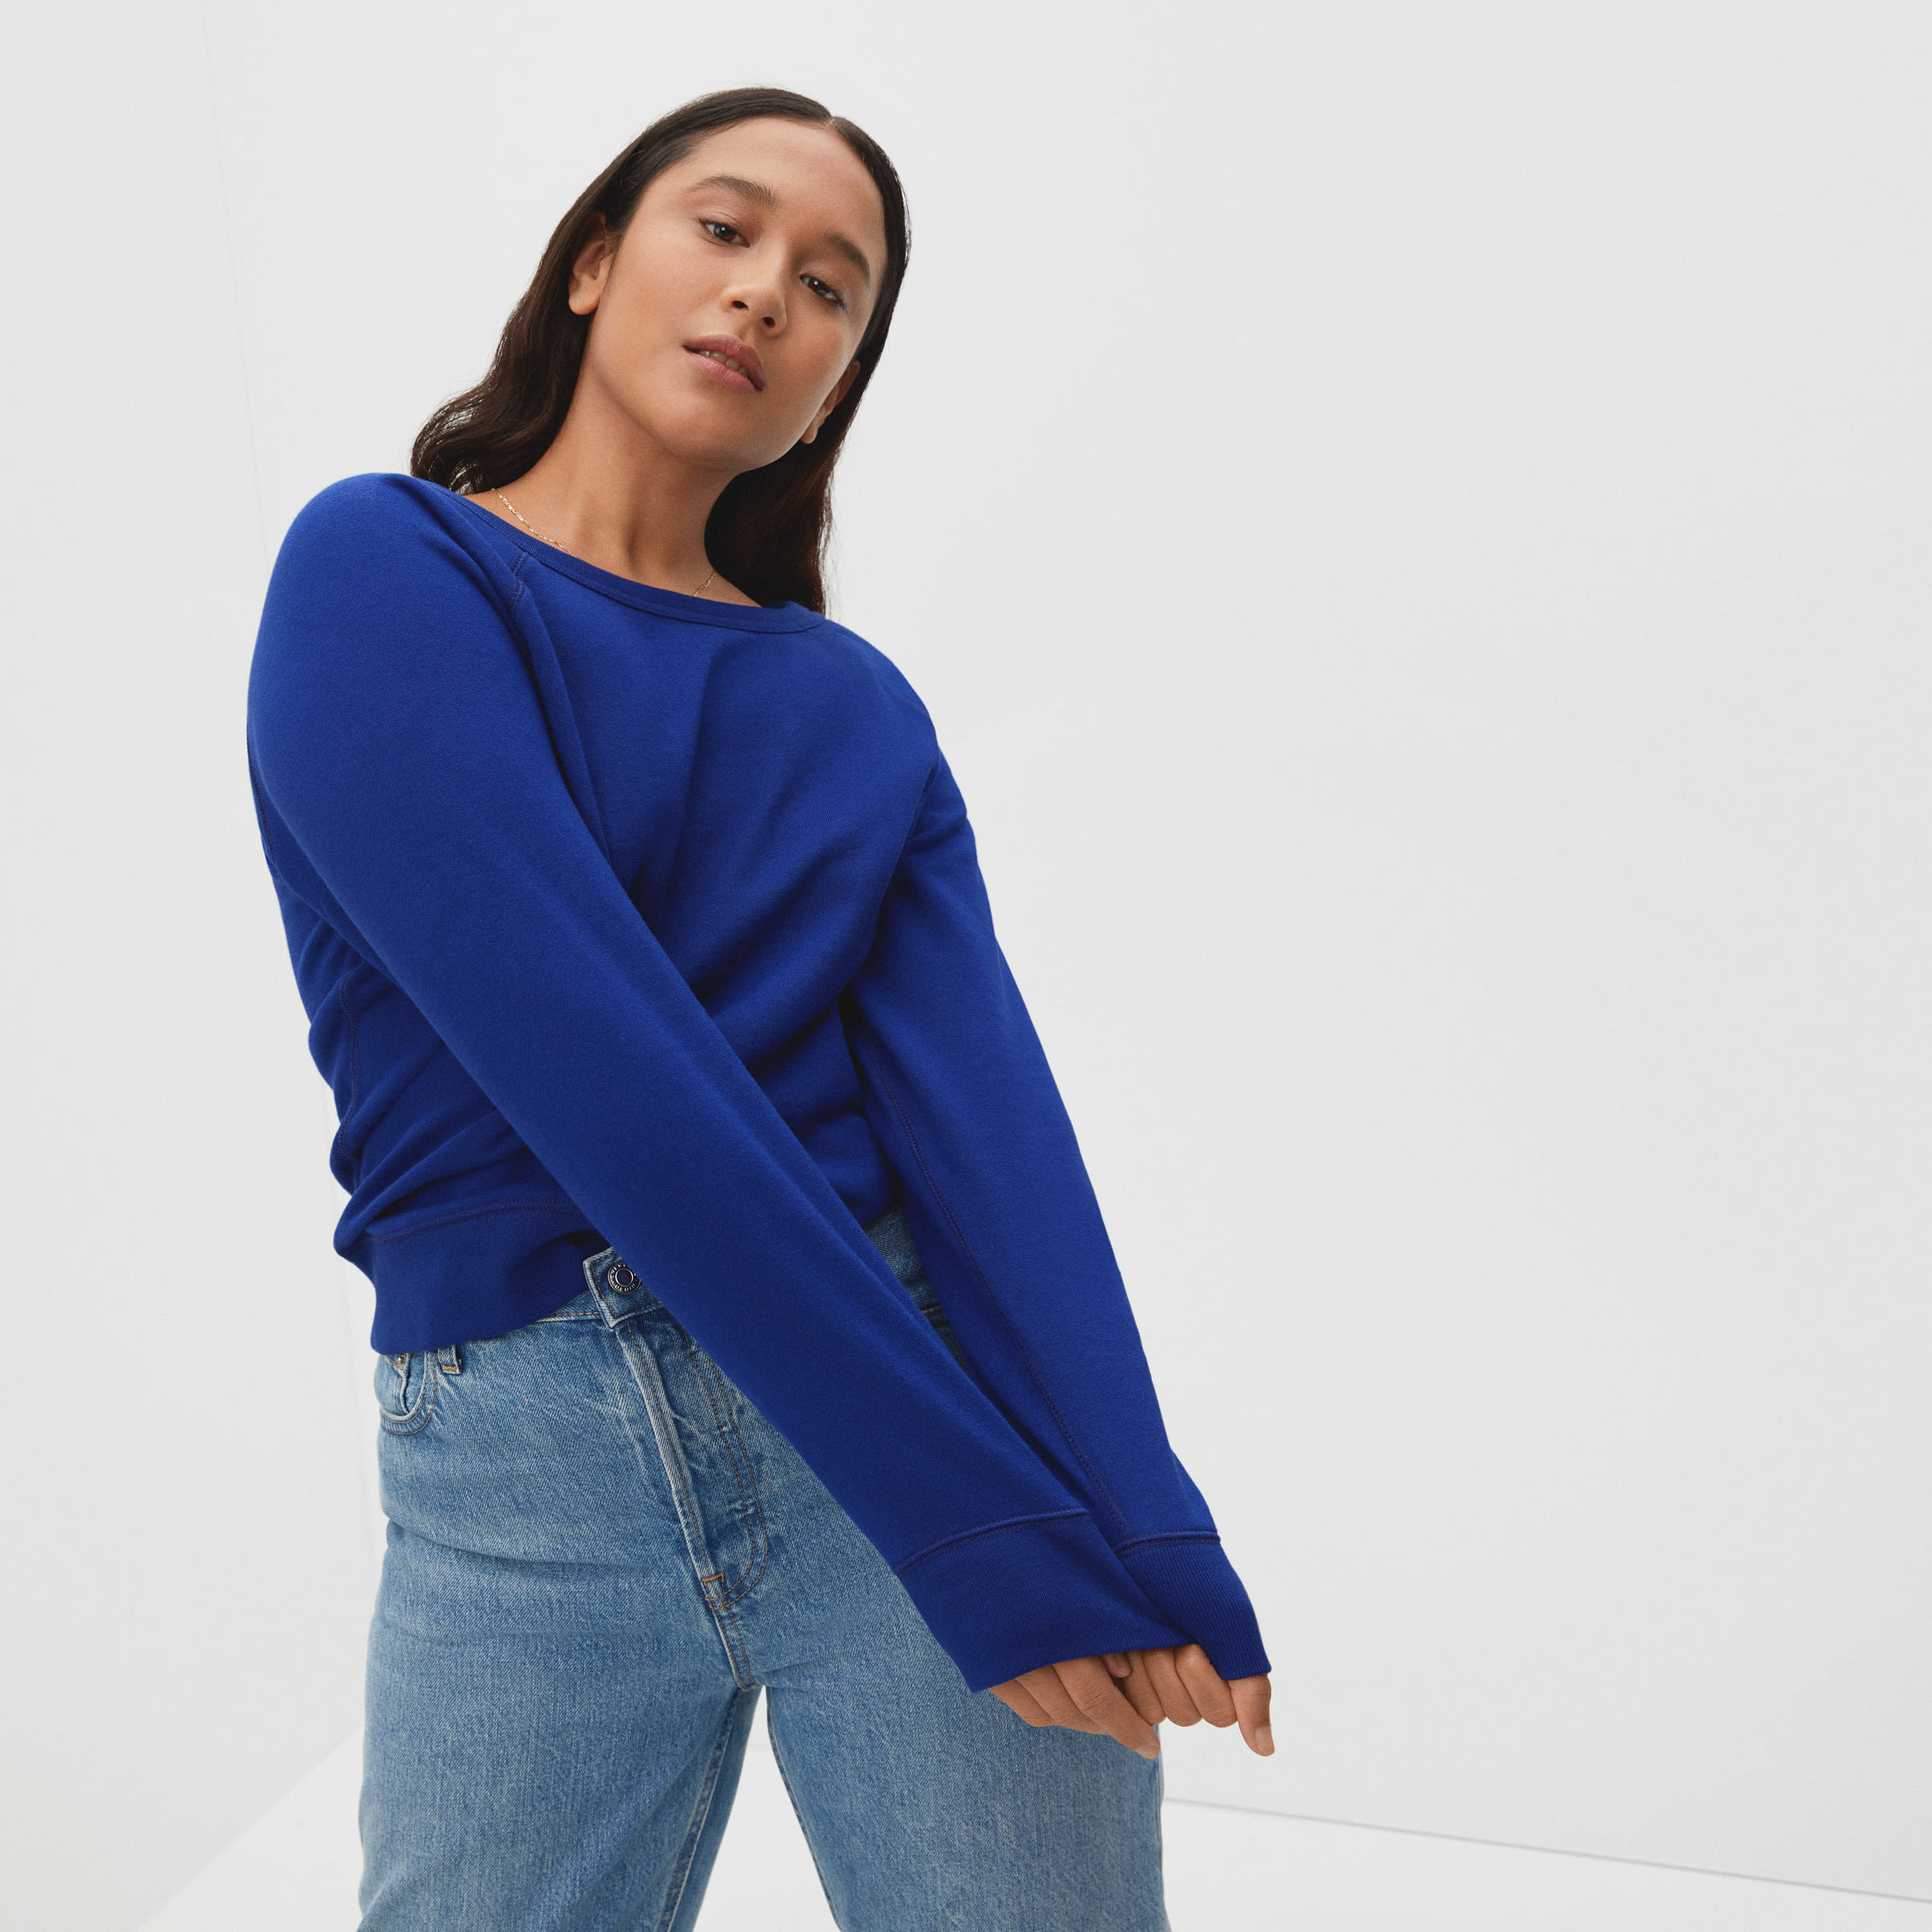 a model in a royal blue pullover